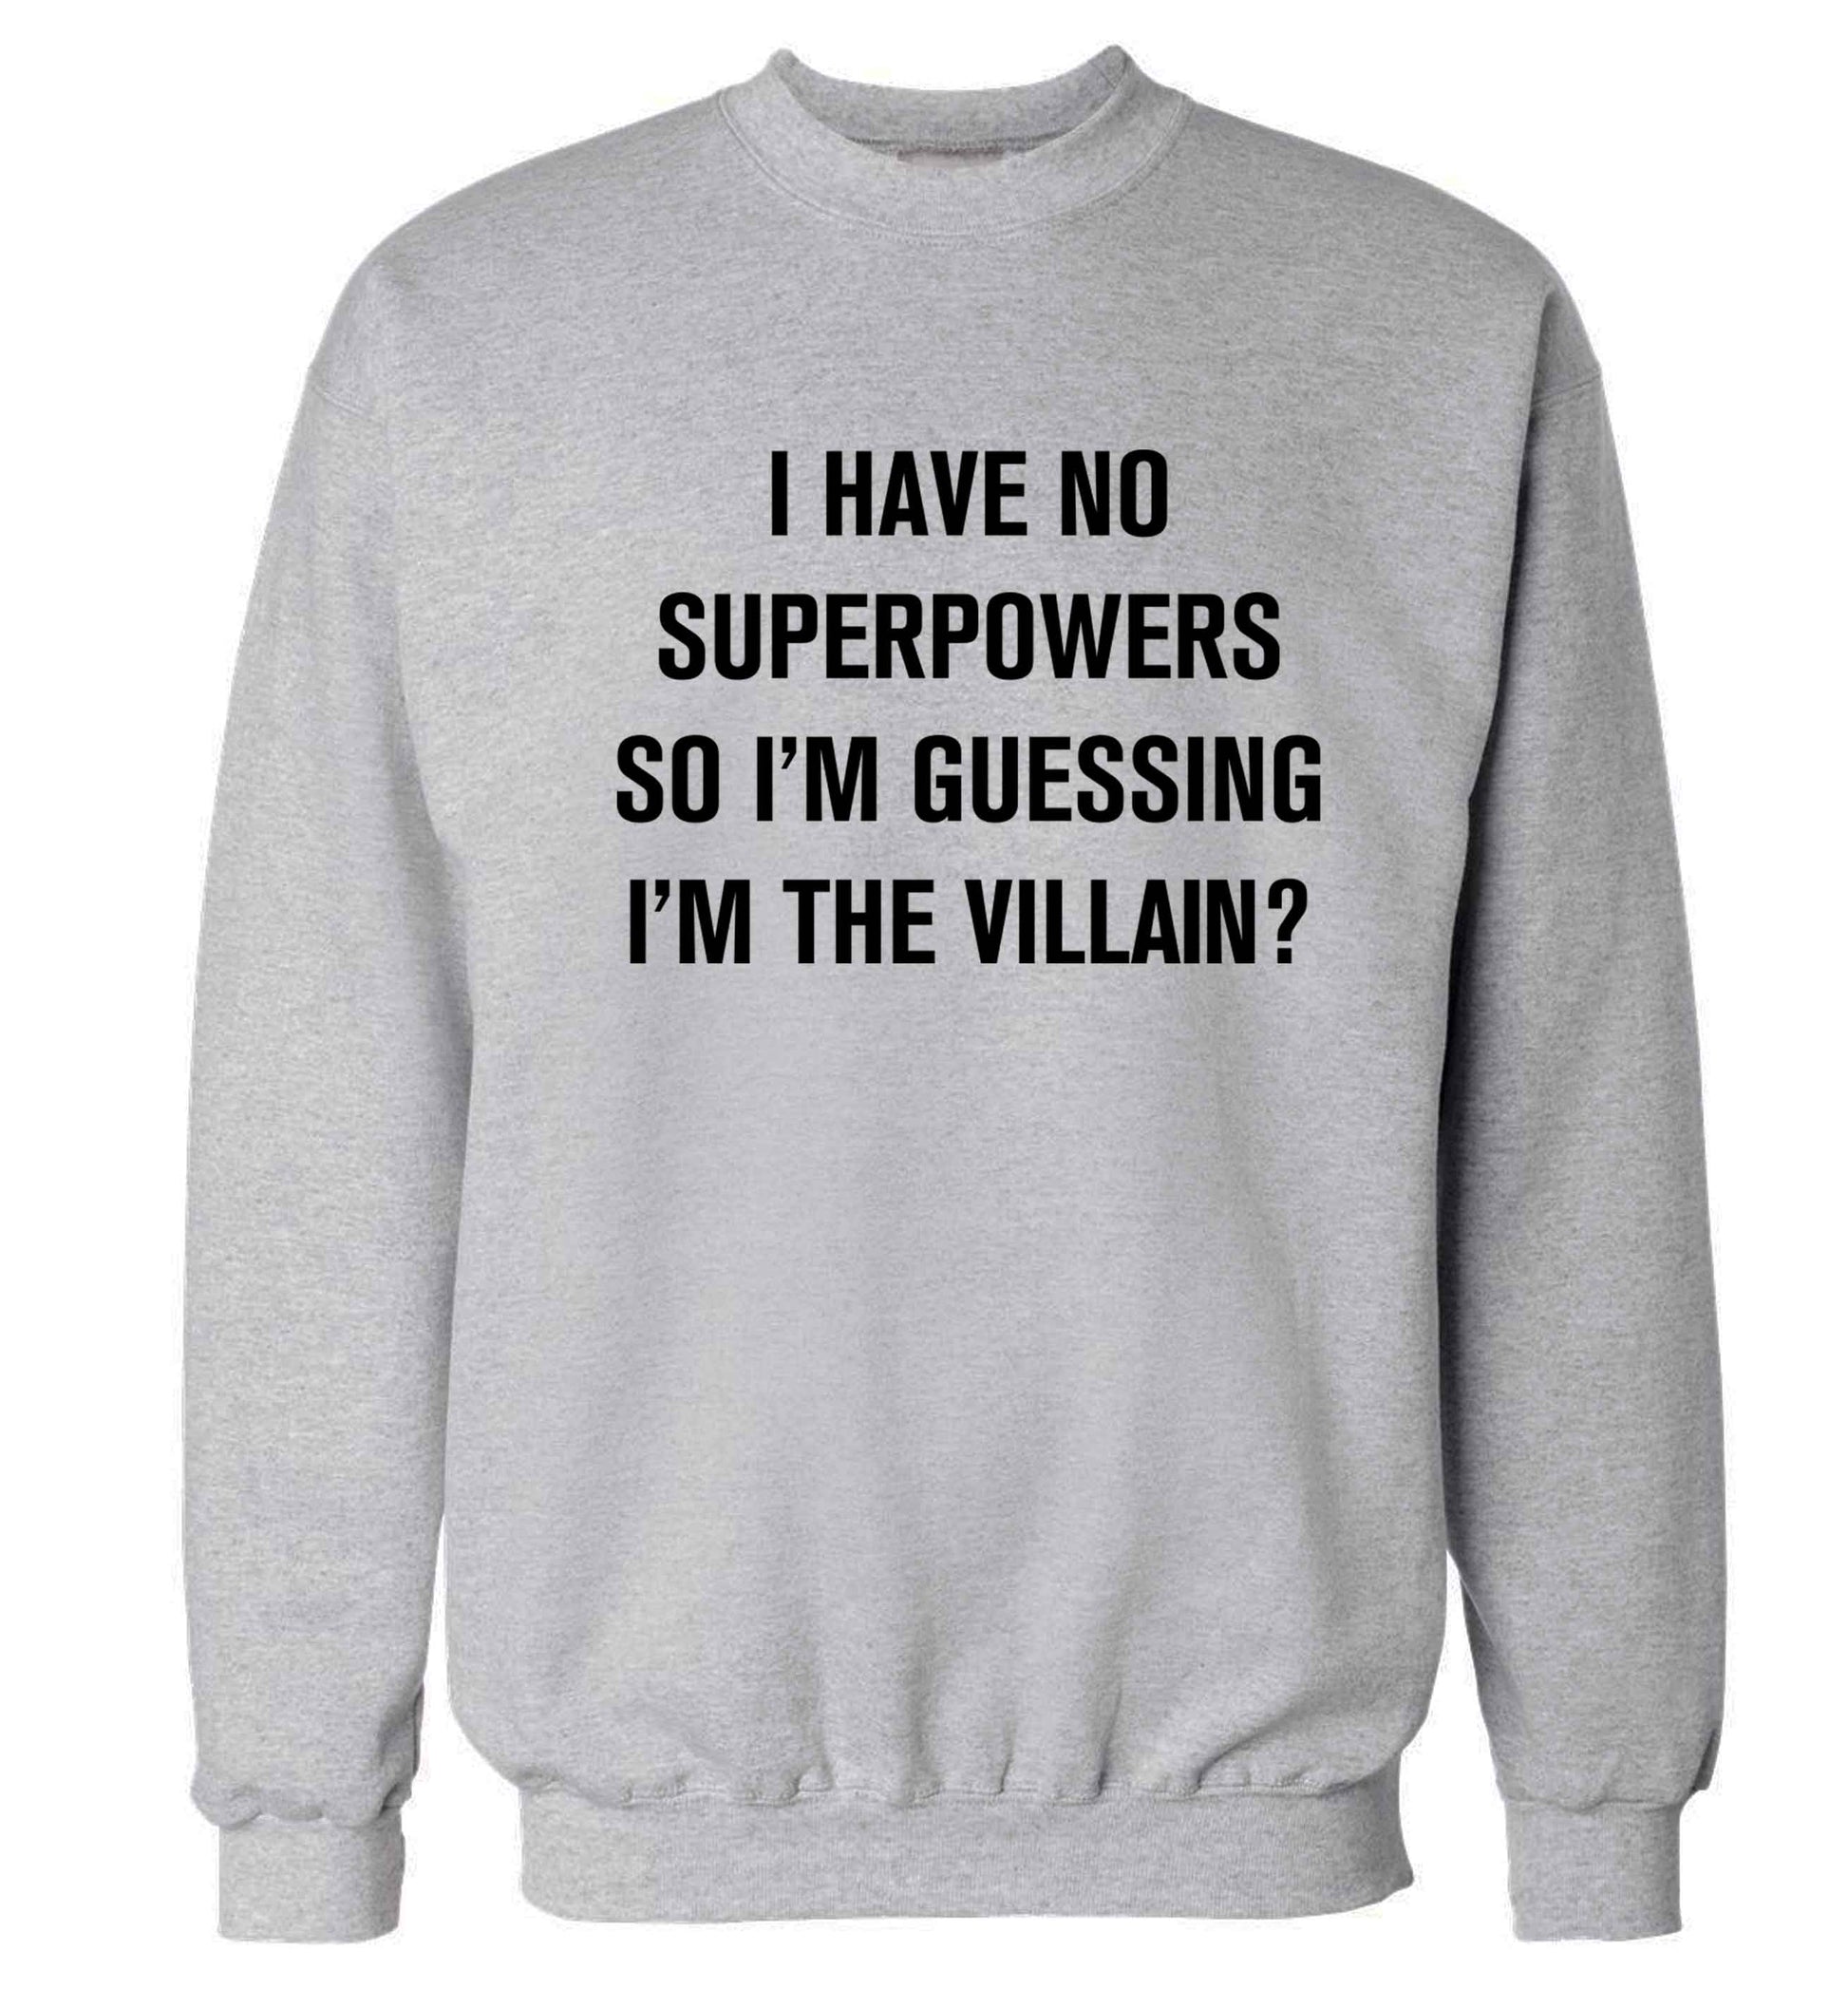 I have no superpowers so I'm guessing I'm the villain? Adult's unisex grey Sweater 2XL